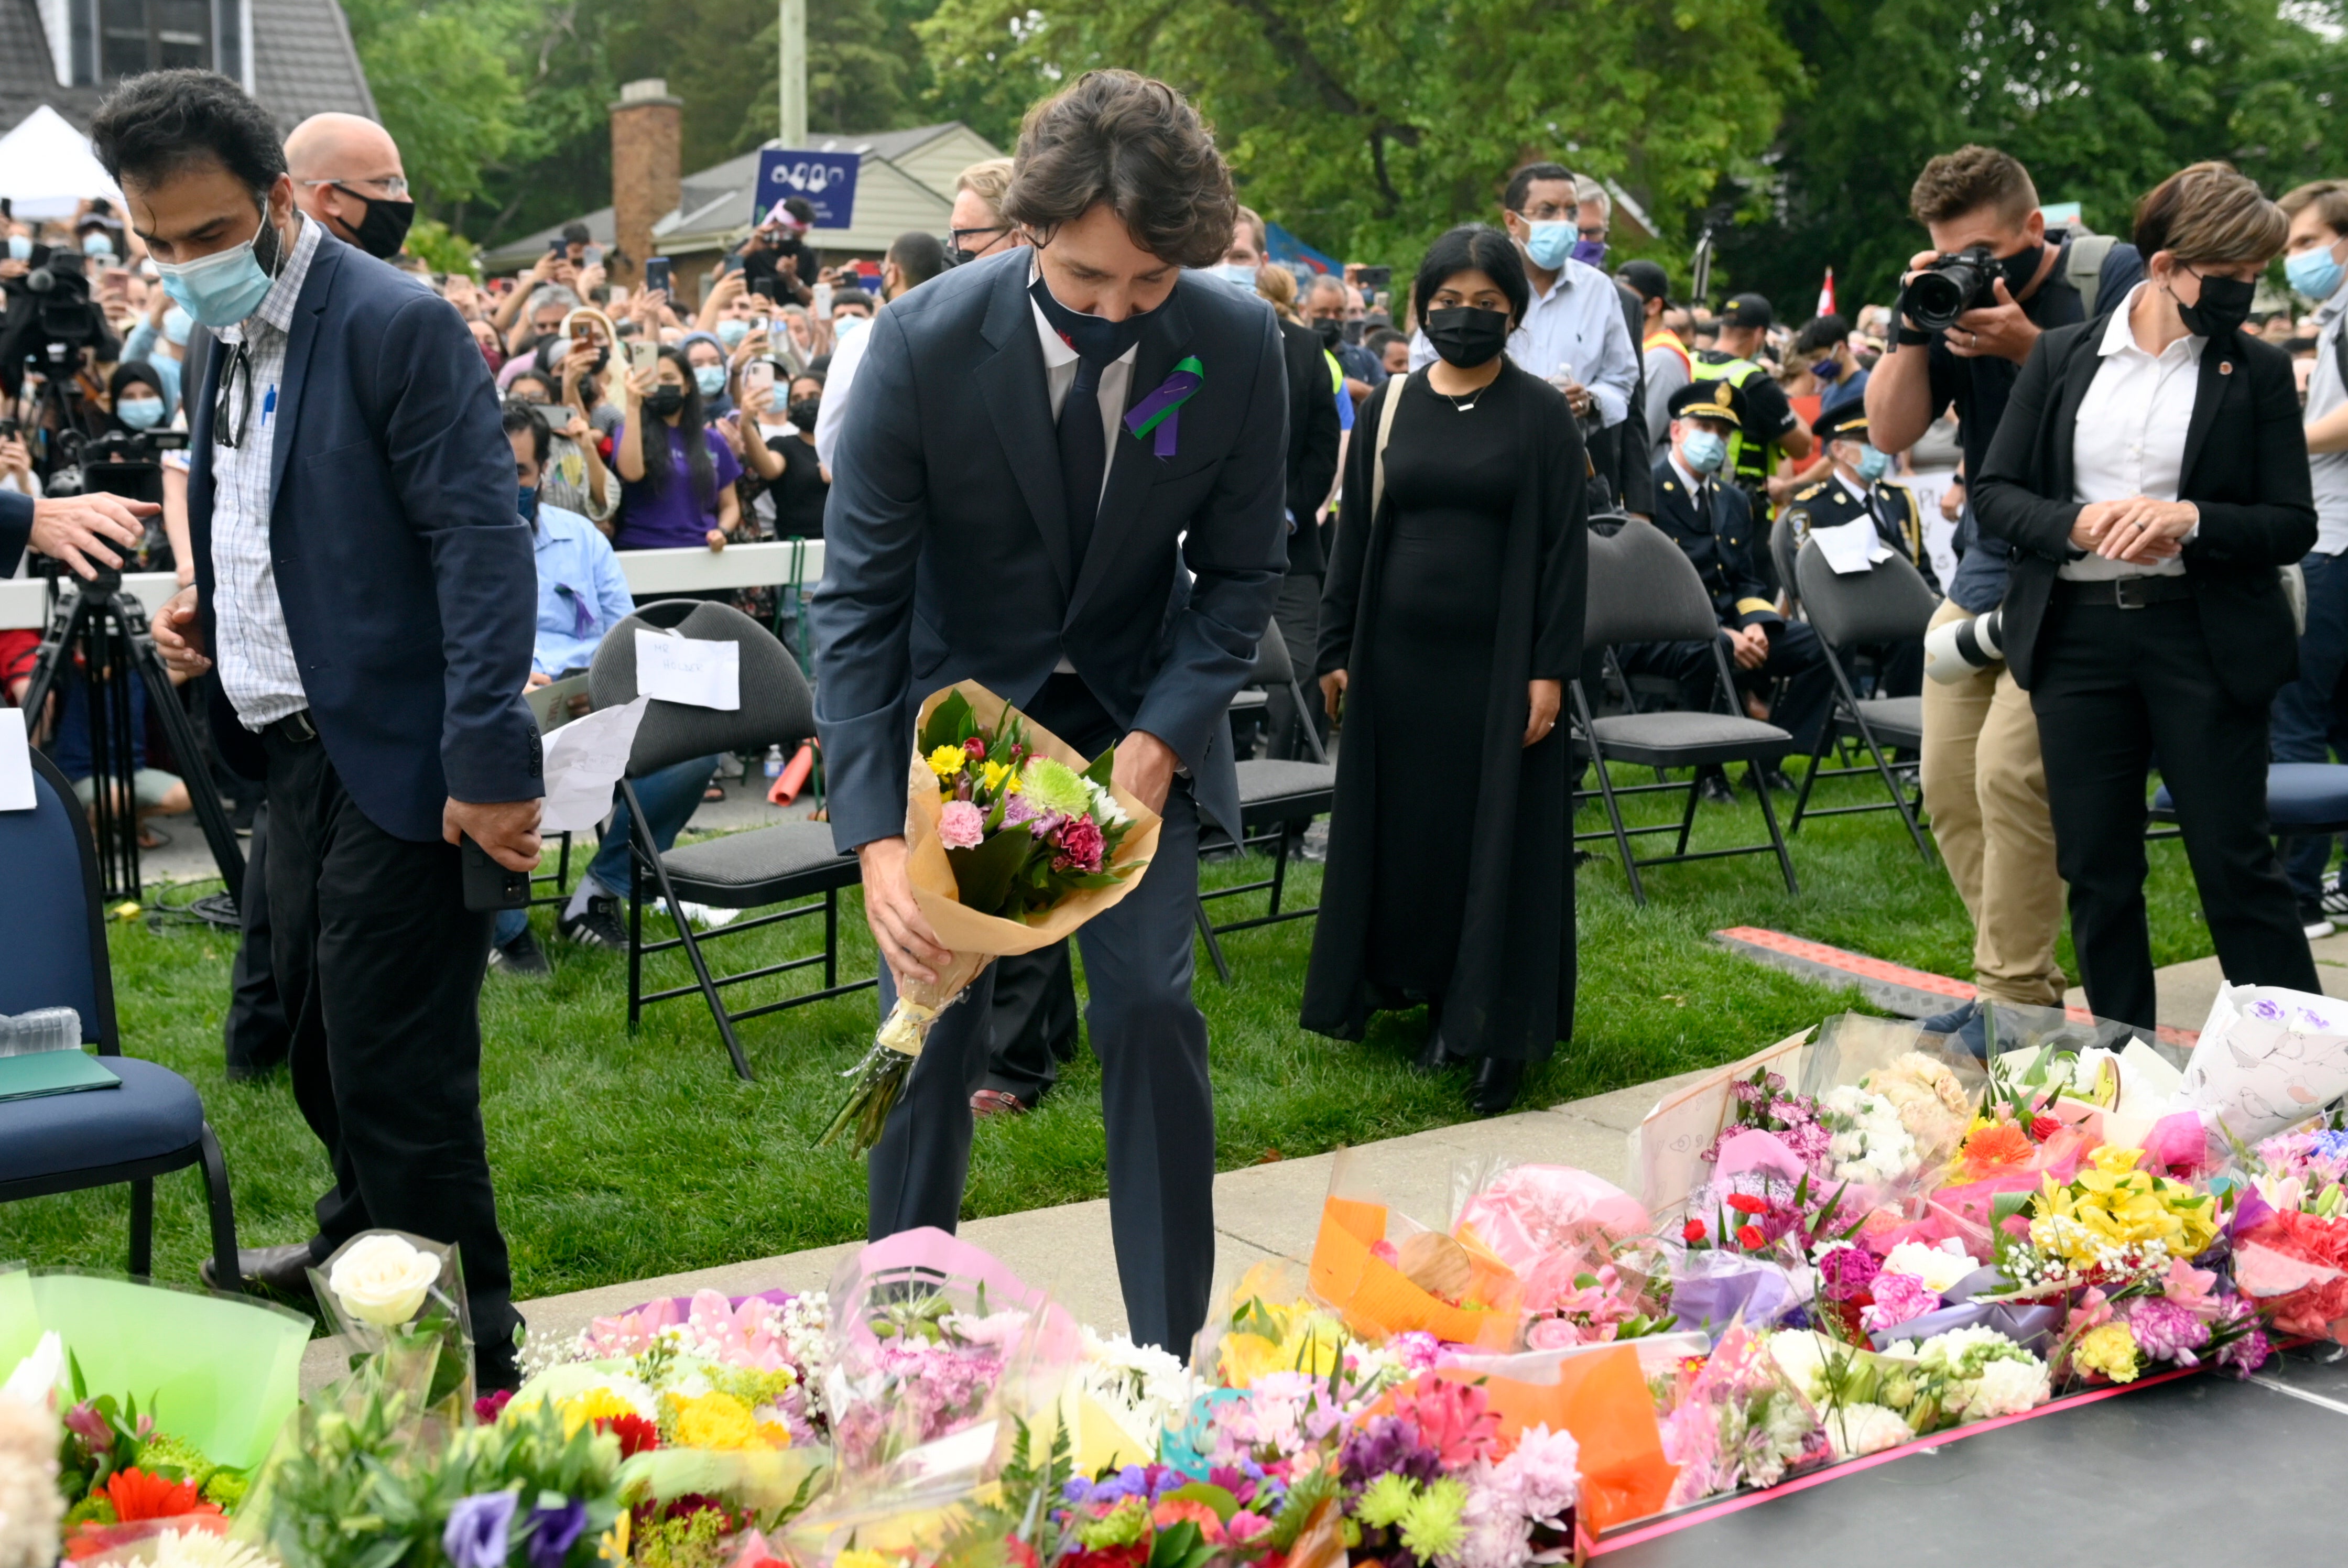 Along with the money, Prime Minister Justin Trudeau condemned the attack